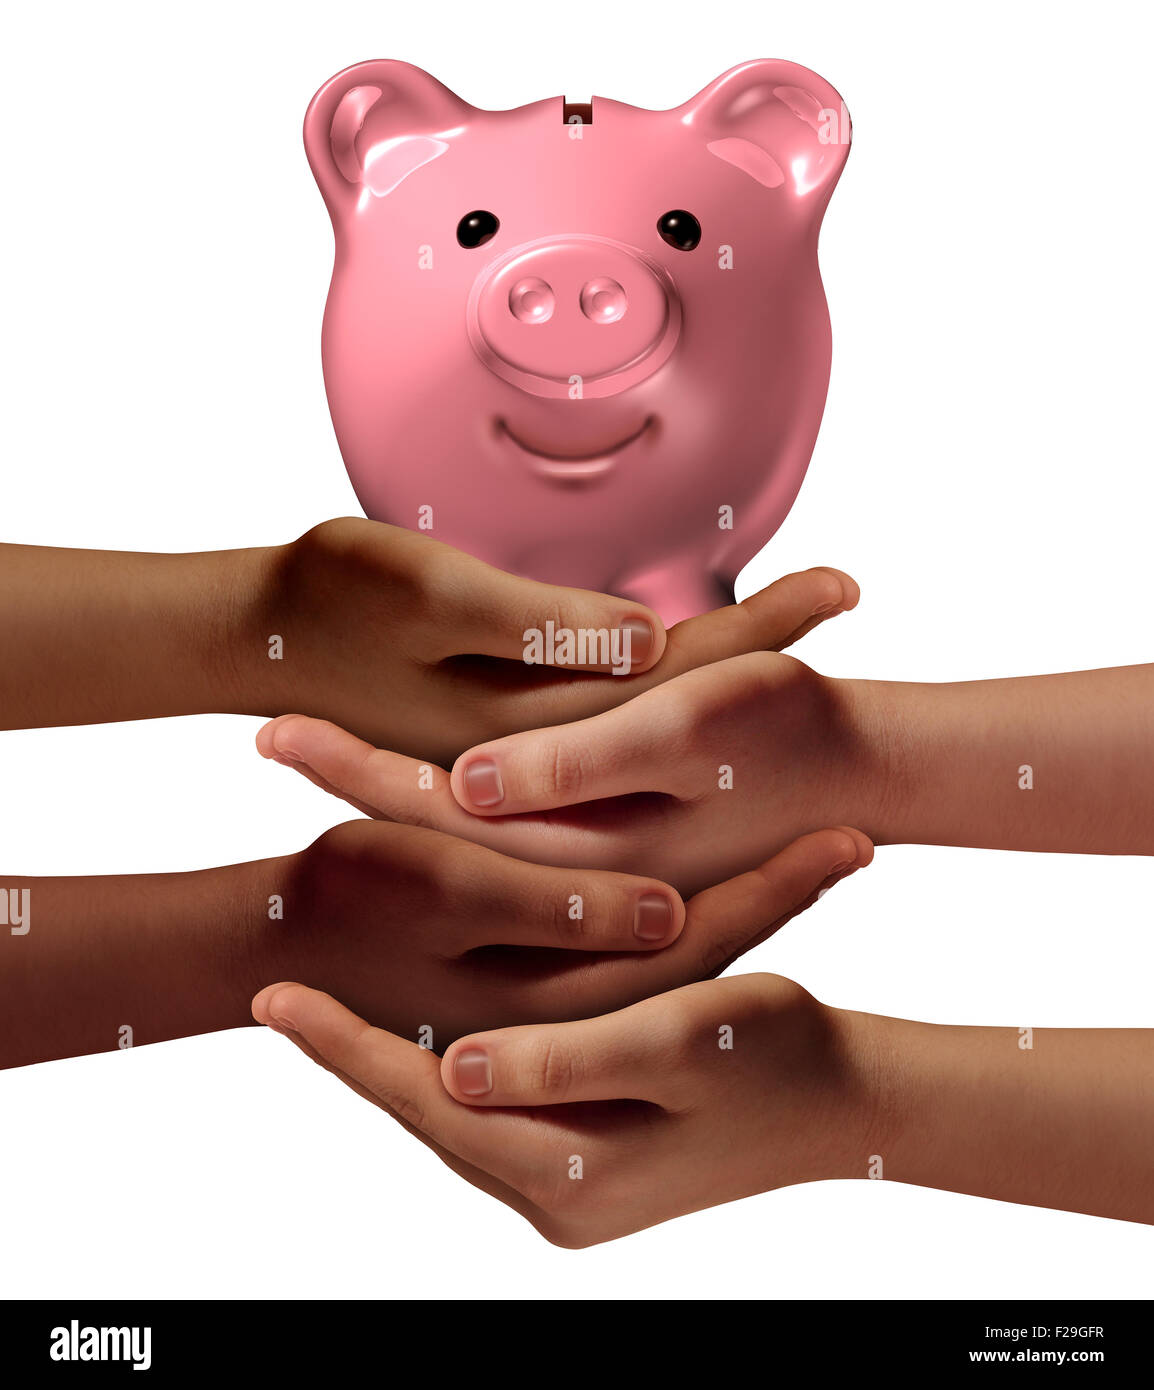 Community savings business concept and social banking symbol as a group of diverse hands holding up a piggy bank as a financial Stock Photo